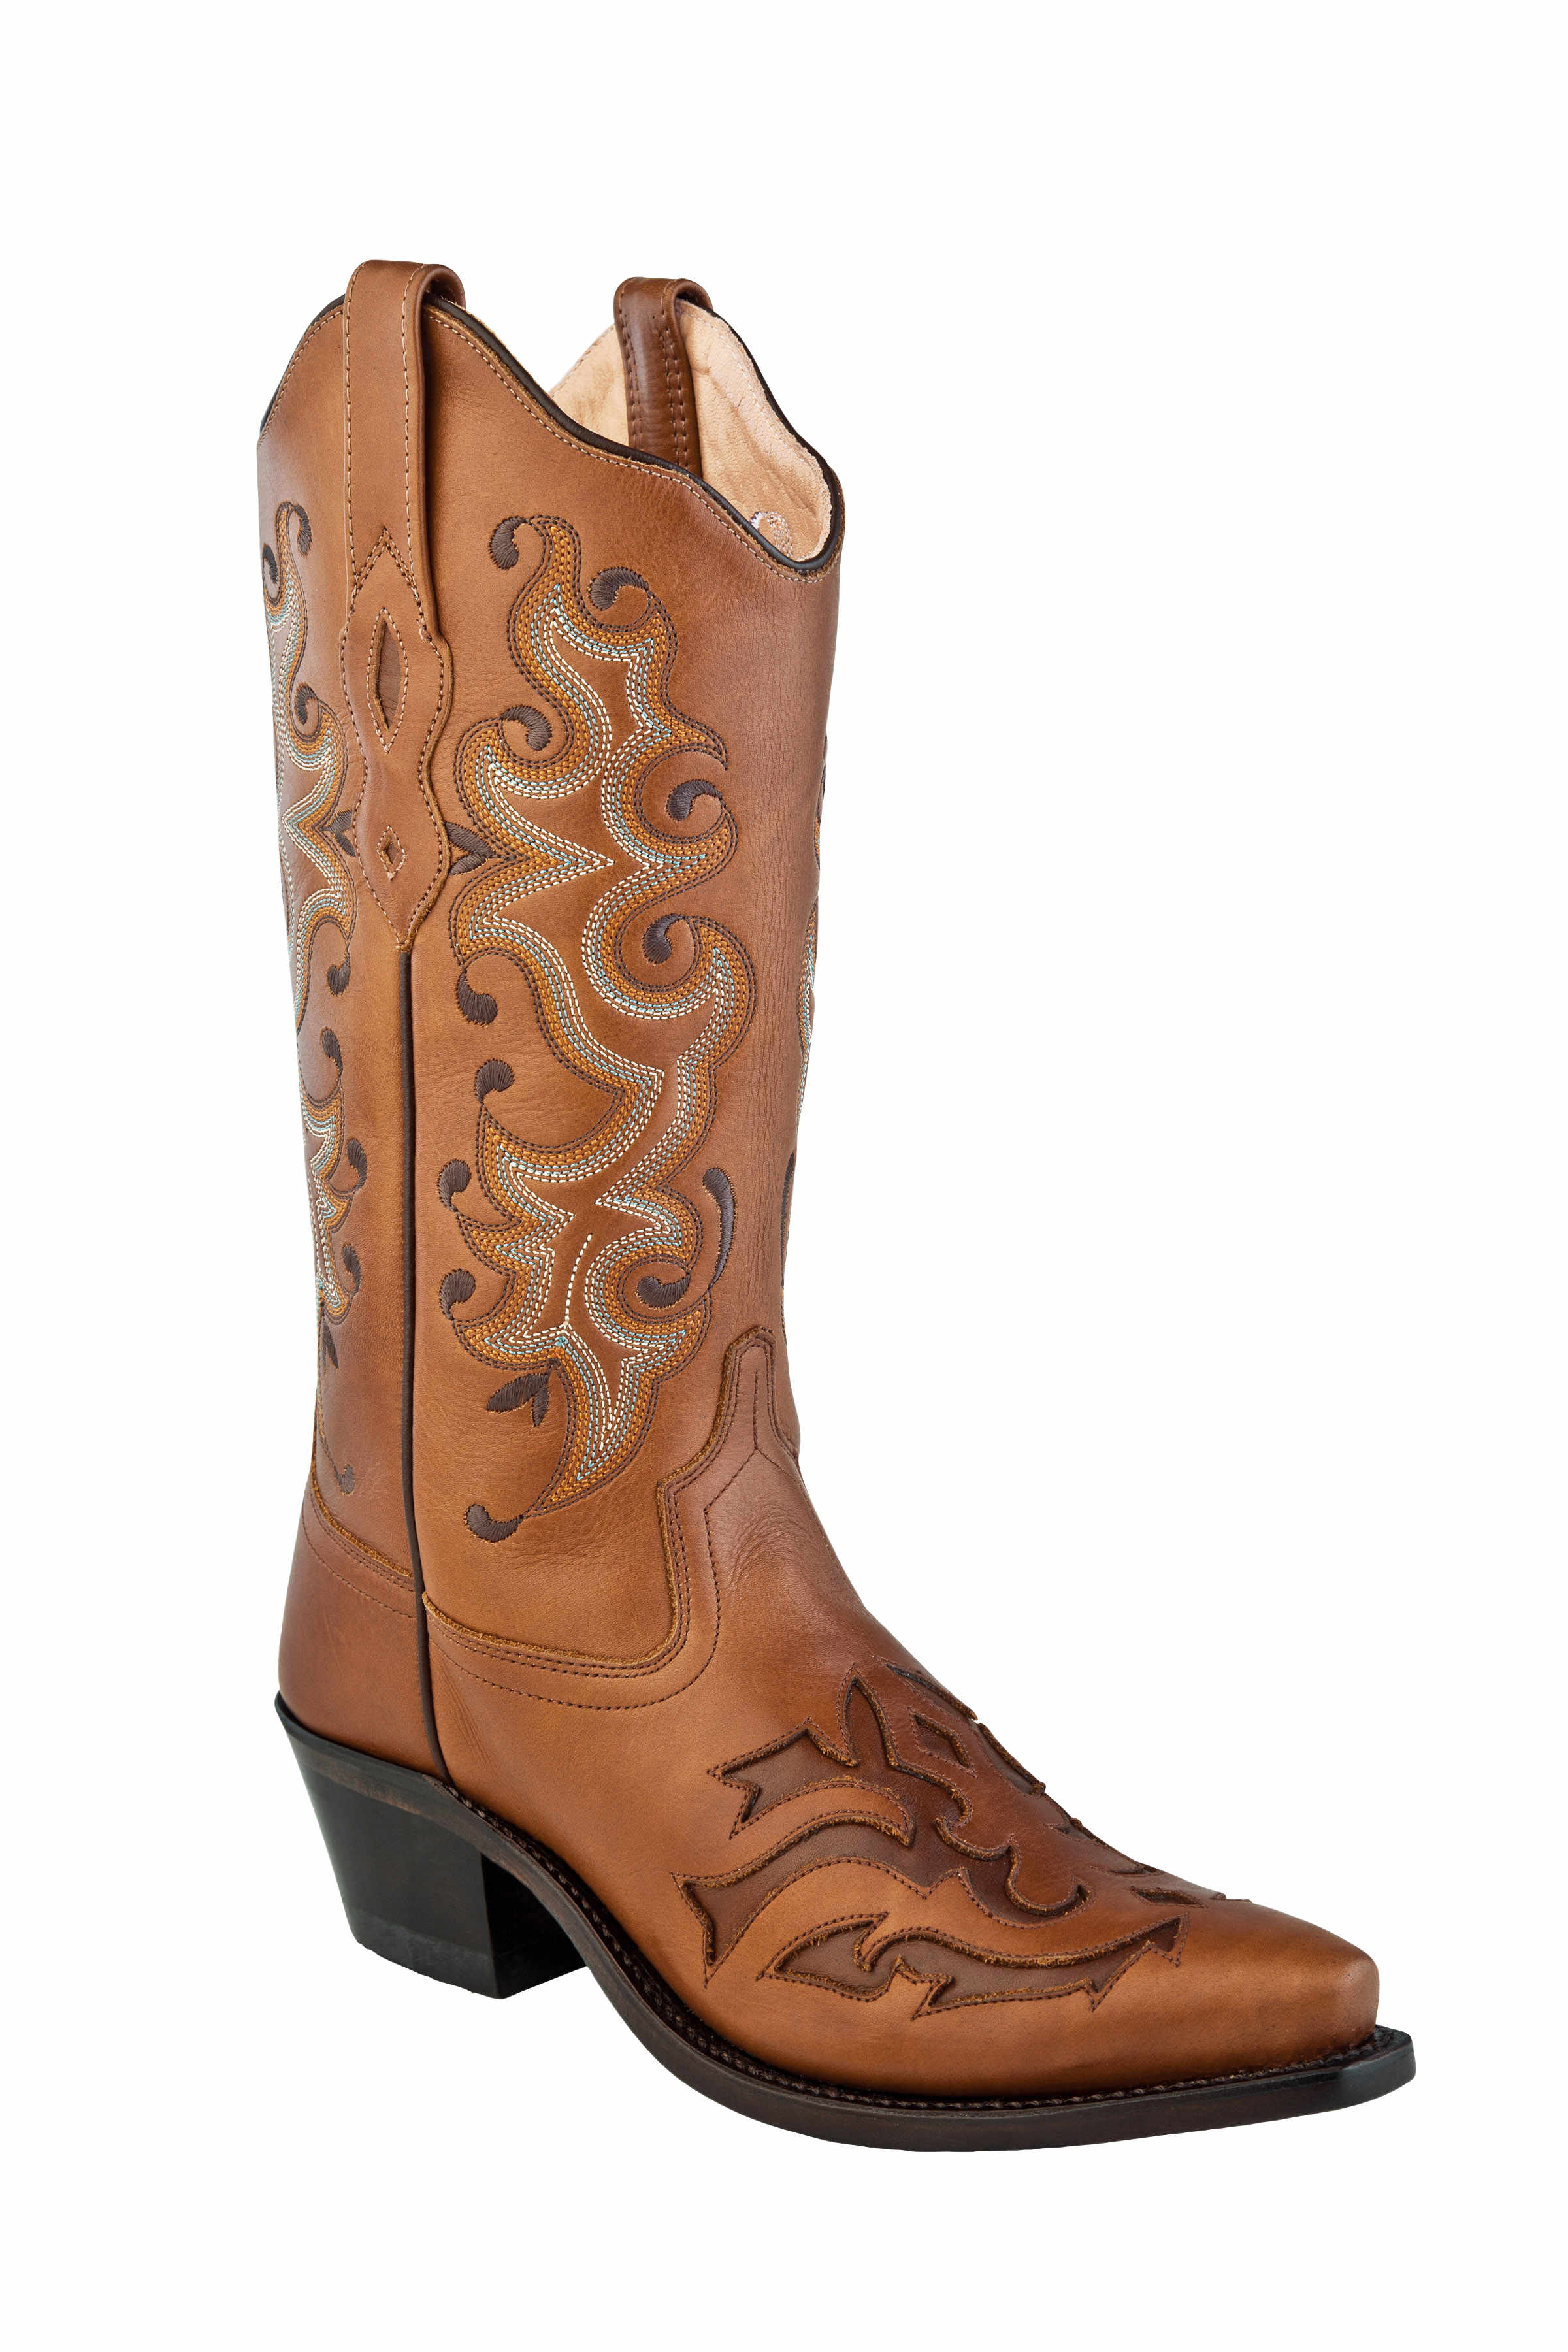 Cowboy boots ladies LF1591E, brown w. embroidery